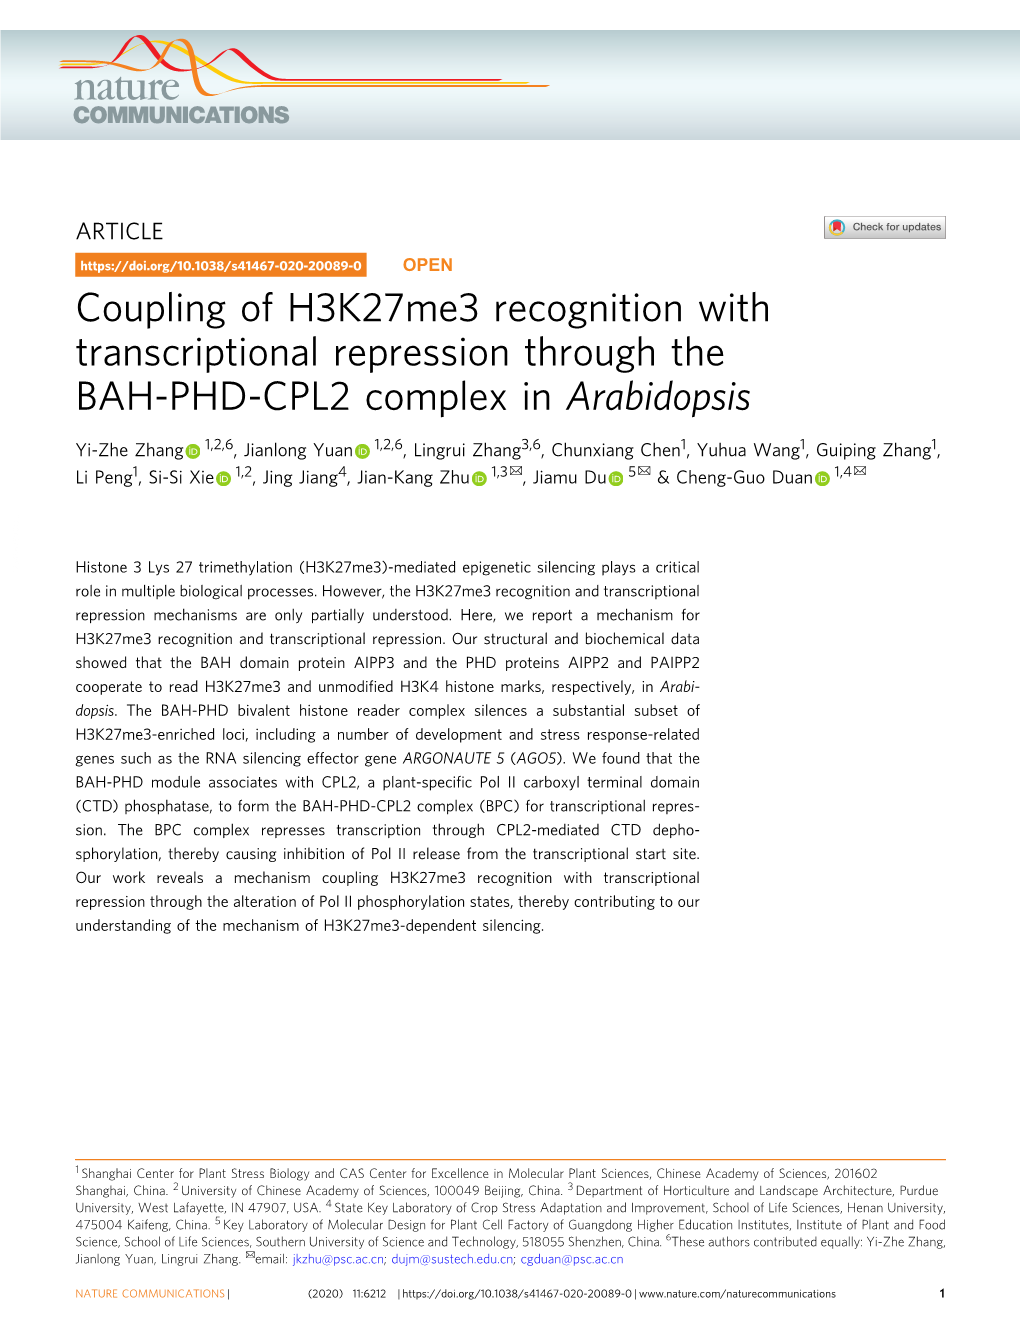 Coupling of H3k27me3 Recognition with Transcriptional Repression Through the BAH-PHD-CPL2 Complex in Arabidopsis